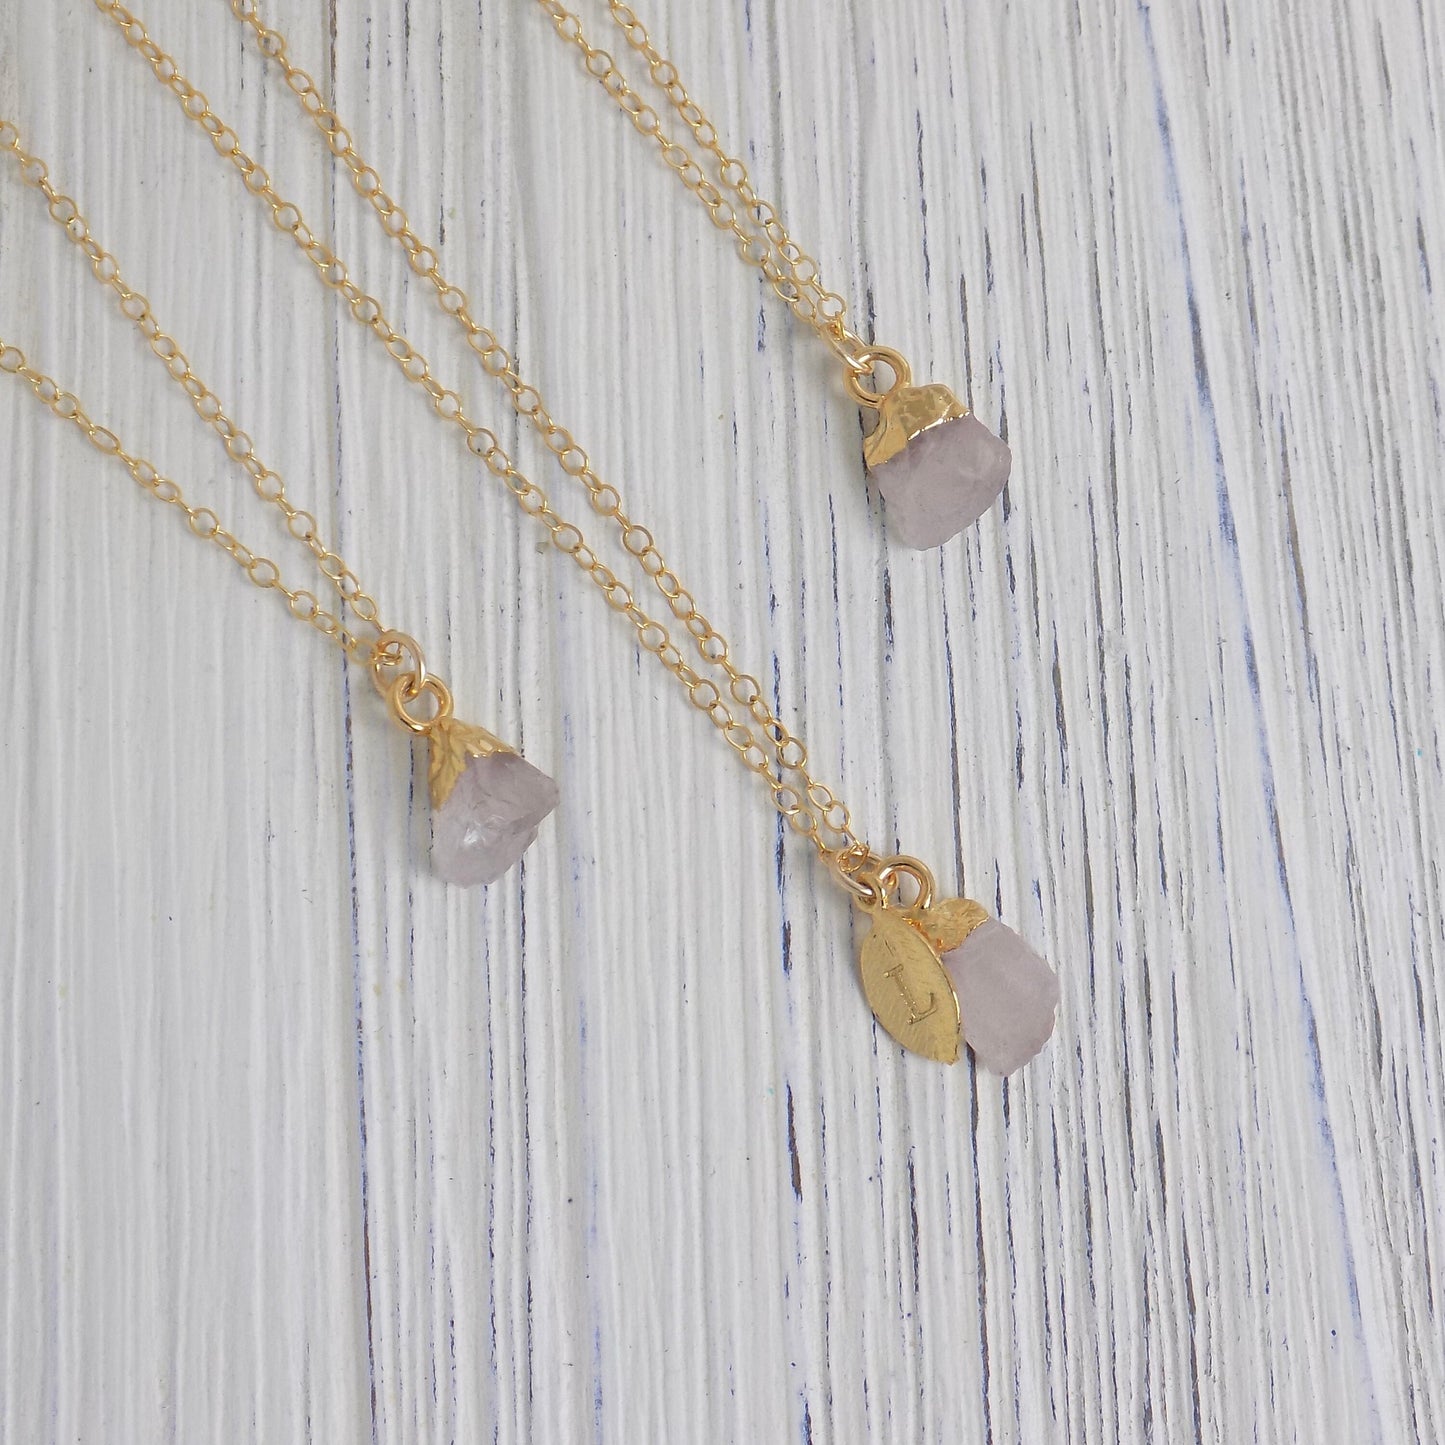 Gifts For Her - Raw Rose Quartz Necklace on 14K Gold Filled Chain